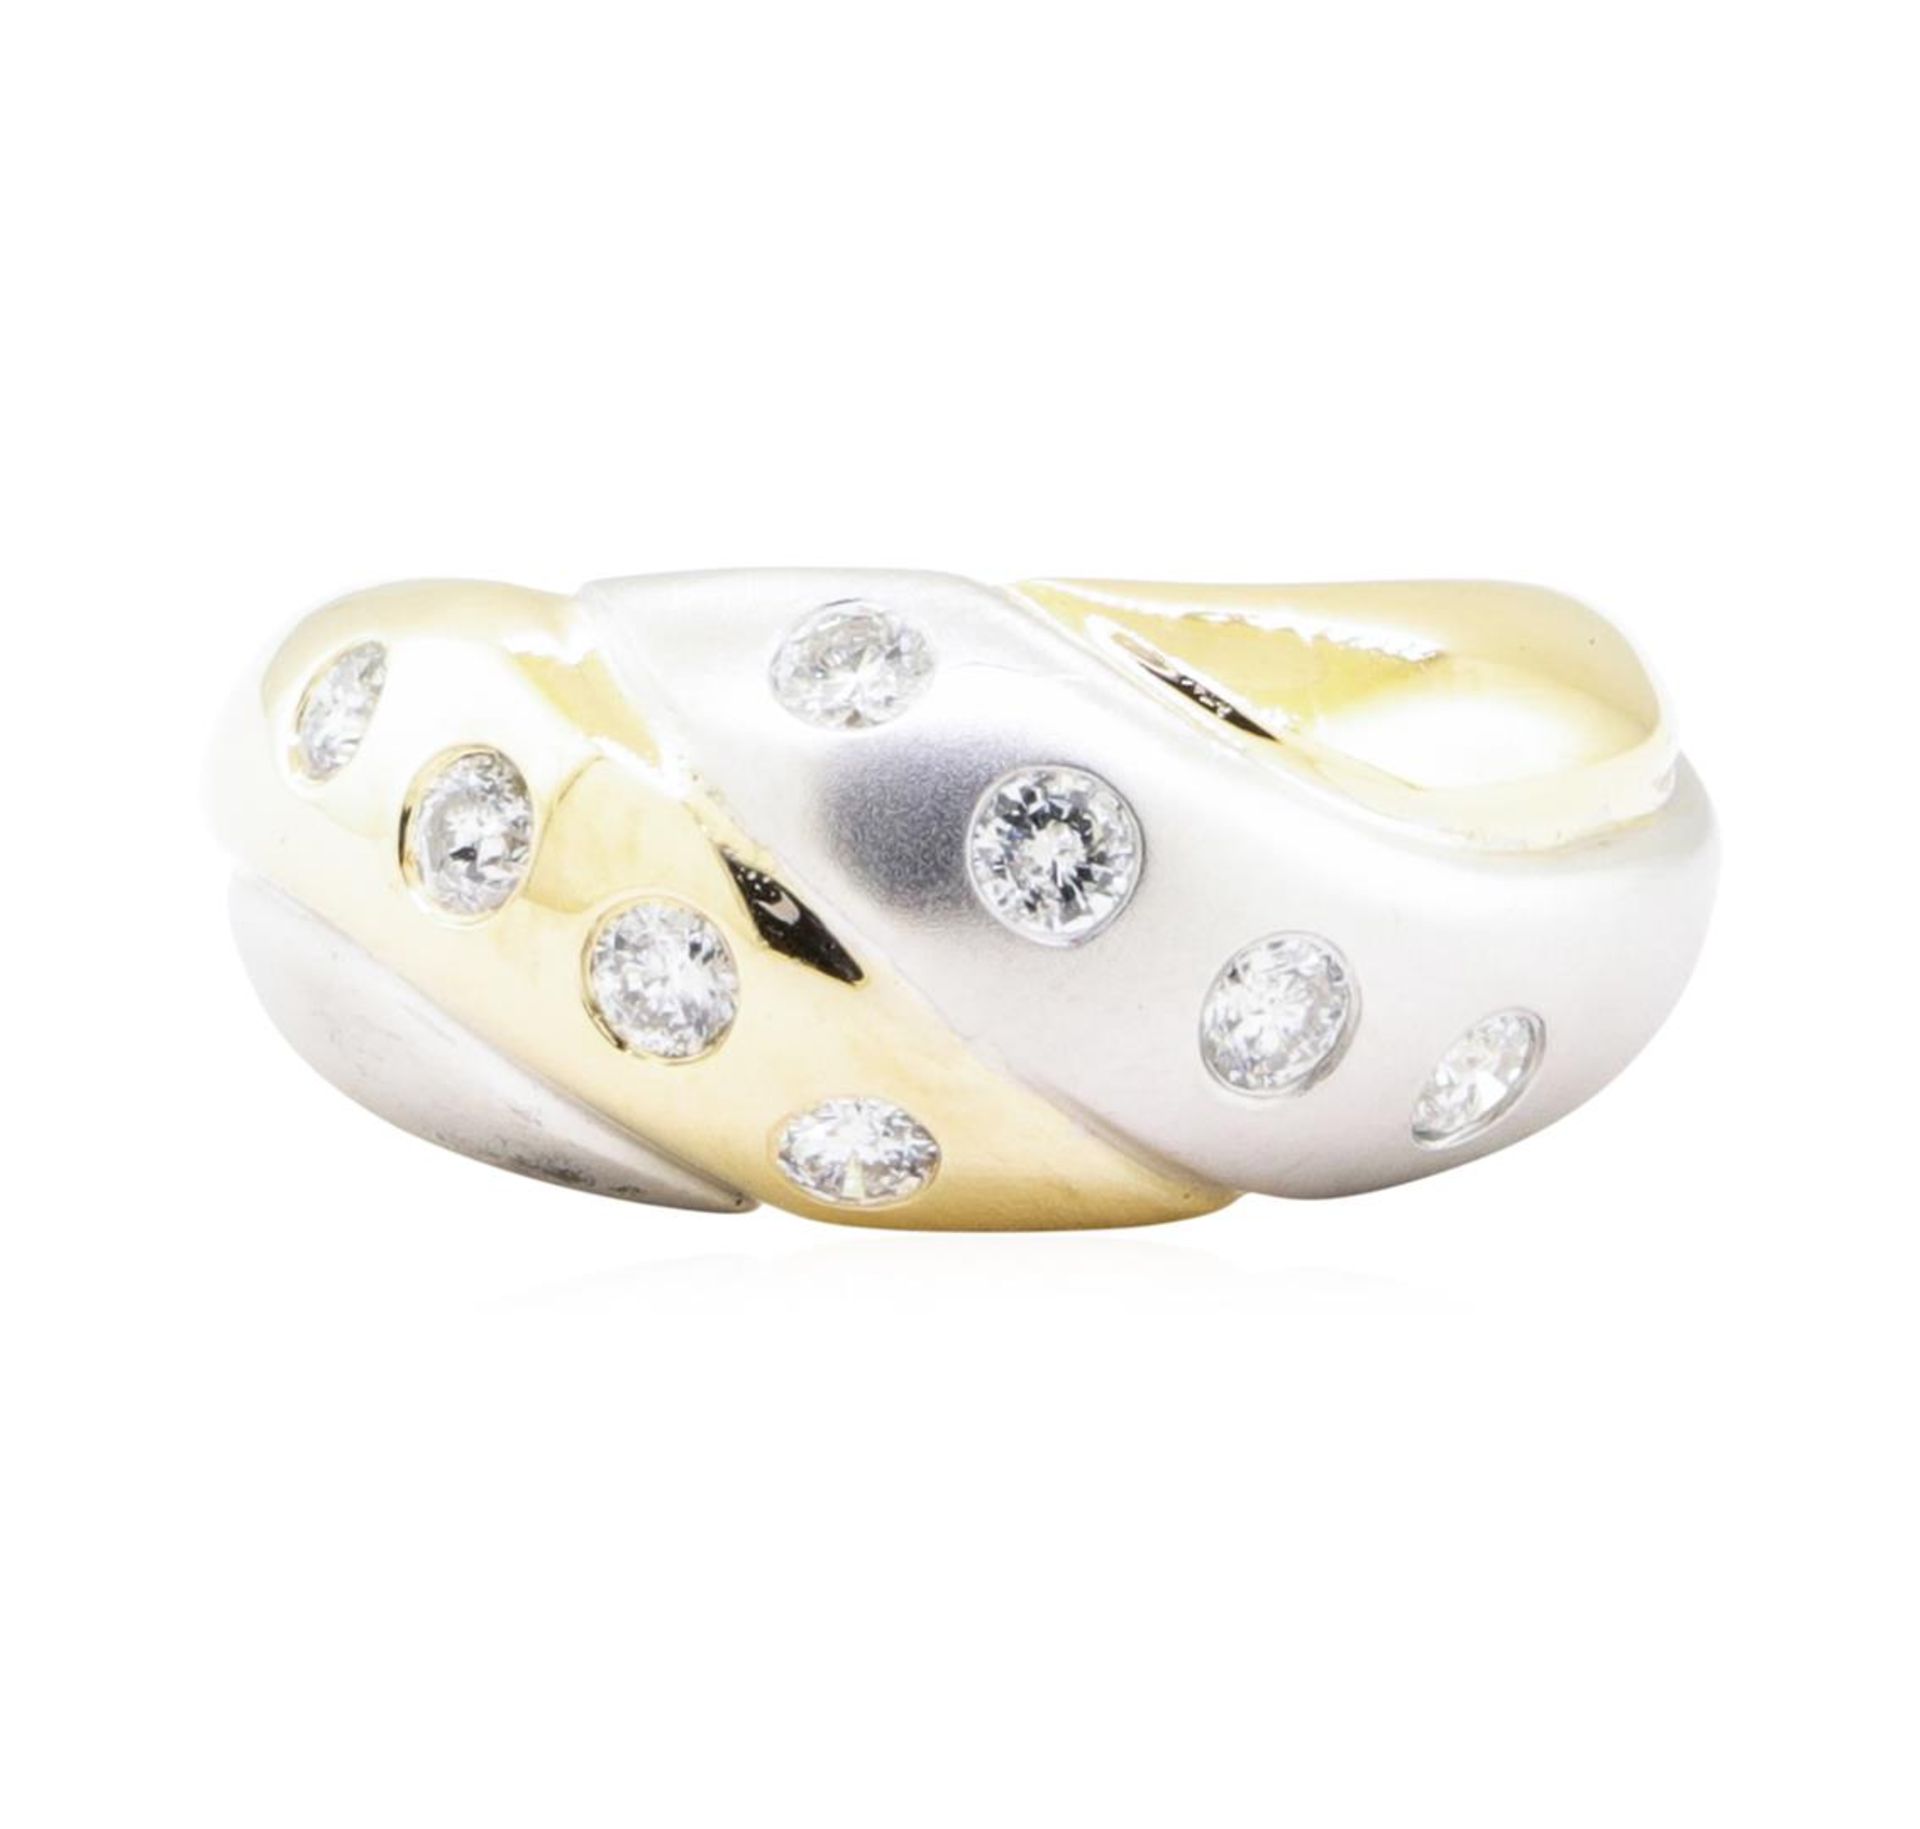 0.50 ctw Diamond Ring - 14KT Yellow And White Gold - Image 2 of 5